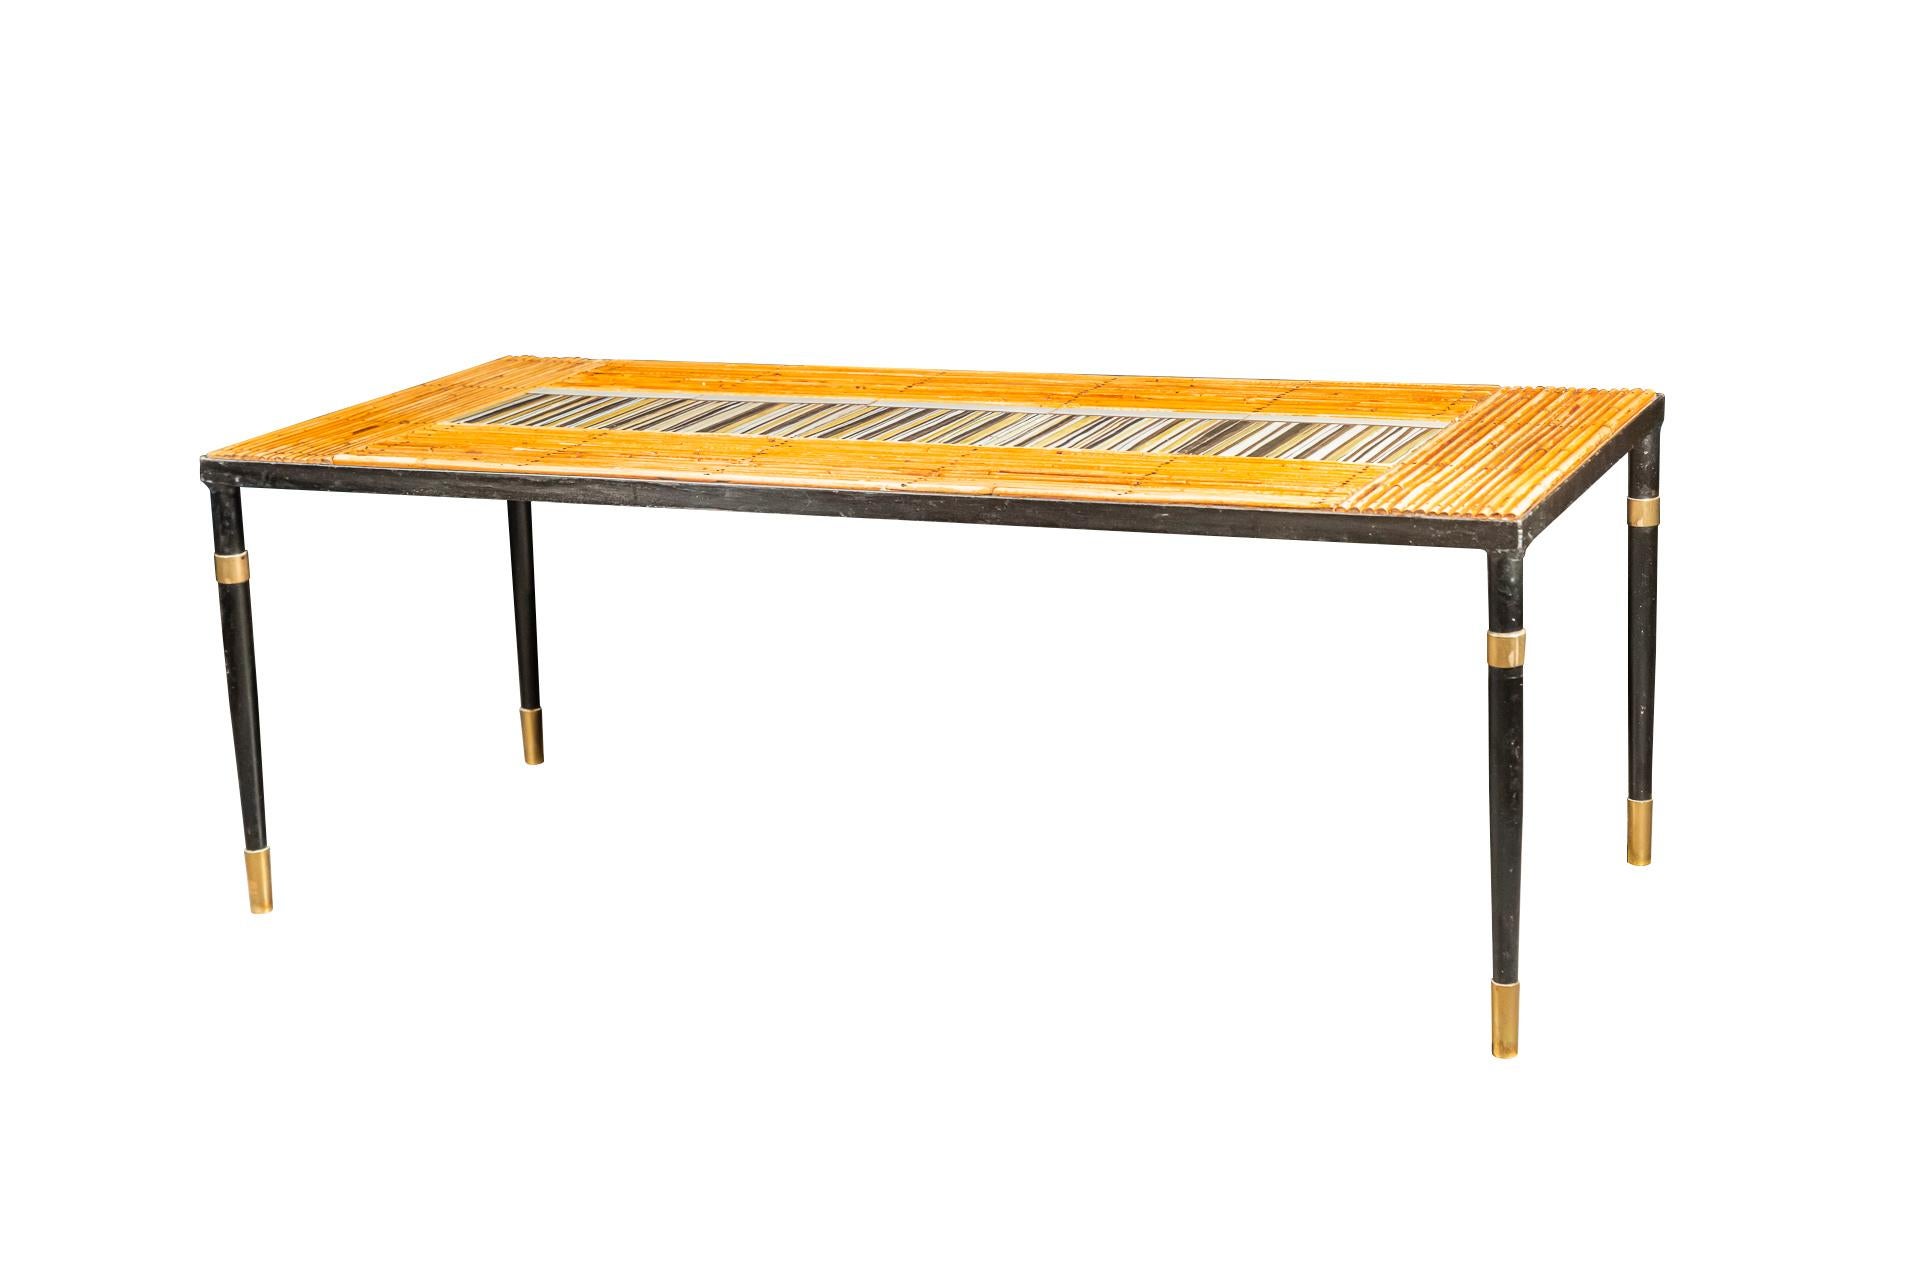 Roger Capron & Francis Bonaudi, Coffee table,
Unsigned faience, hobnailed bamboo,
Ceramic tiles by Roger Capron,
Painted iron feet, brass,
France, circa 1960.

Measures: Width 100 cm, depth 45 cm, eight 36 cm.

Roger Capron, born in Vincennes on